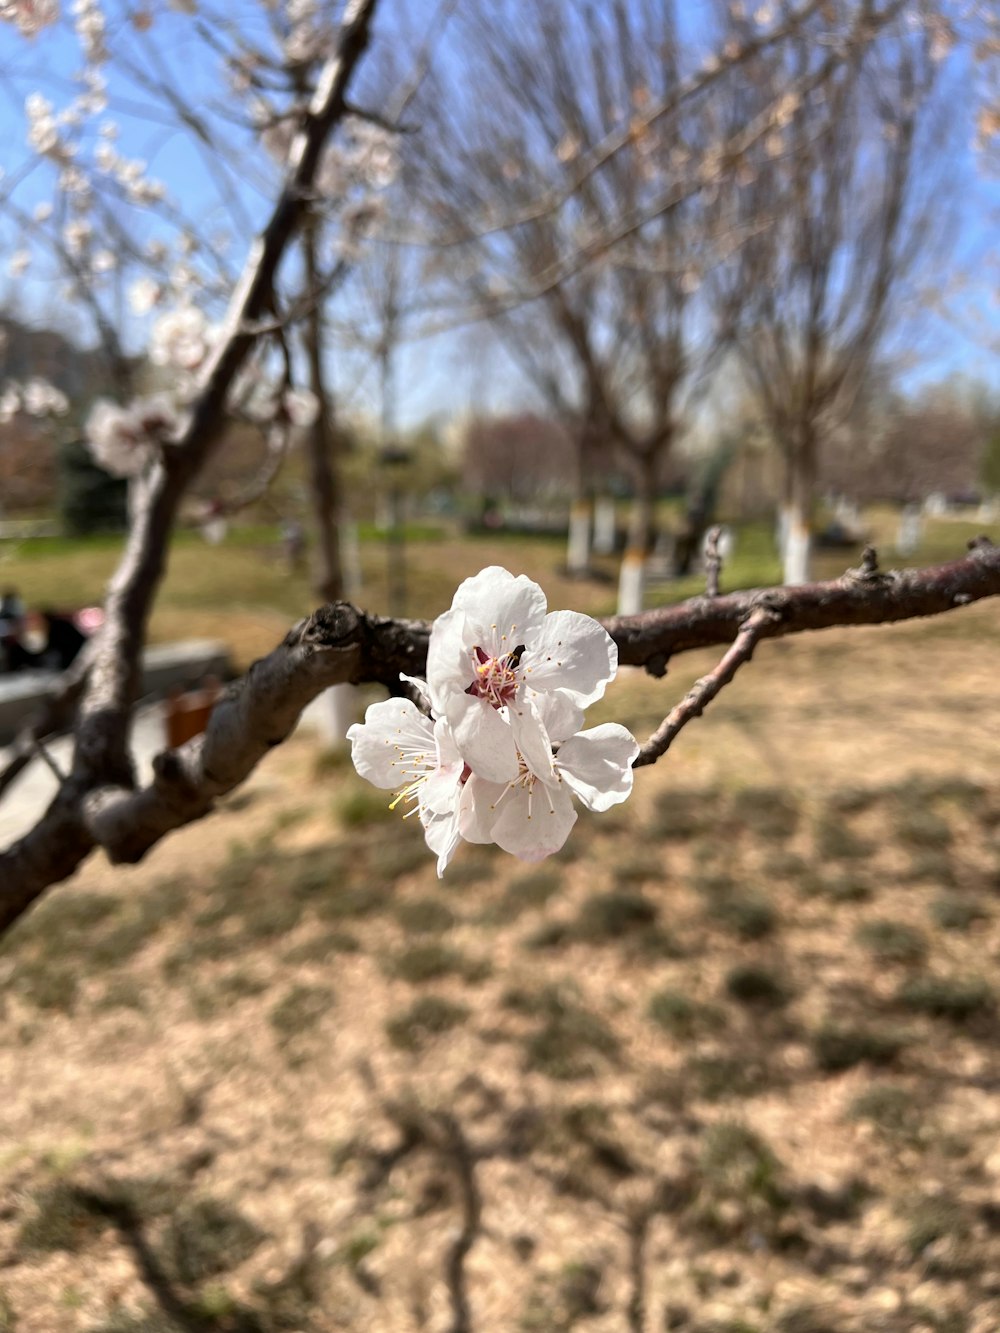 a white flower on a tree branch in a park